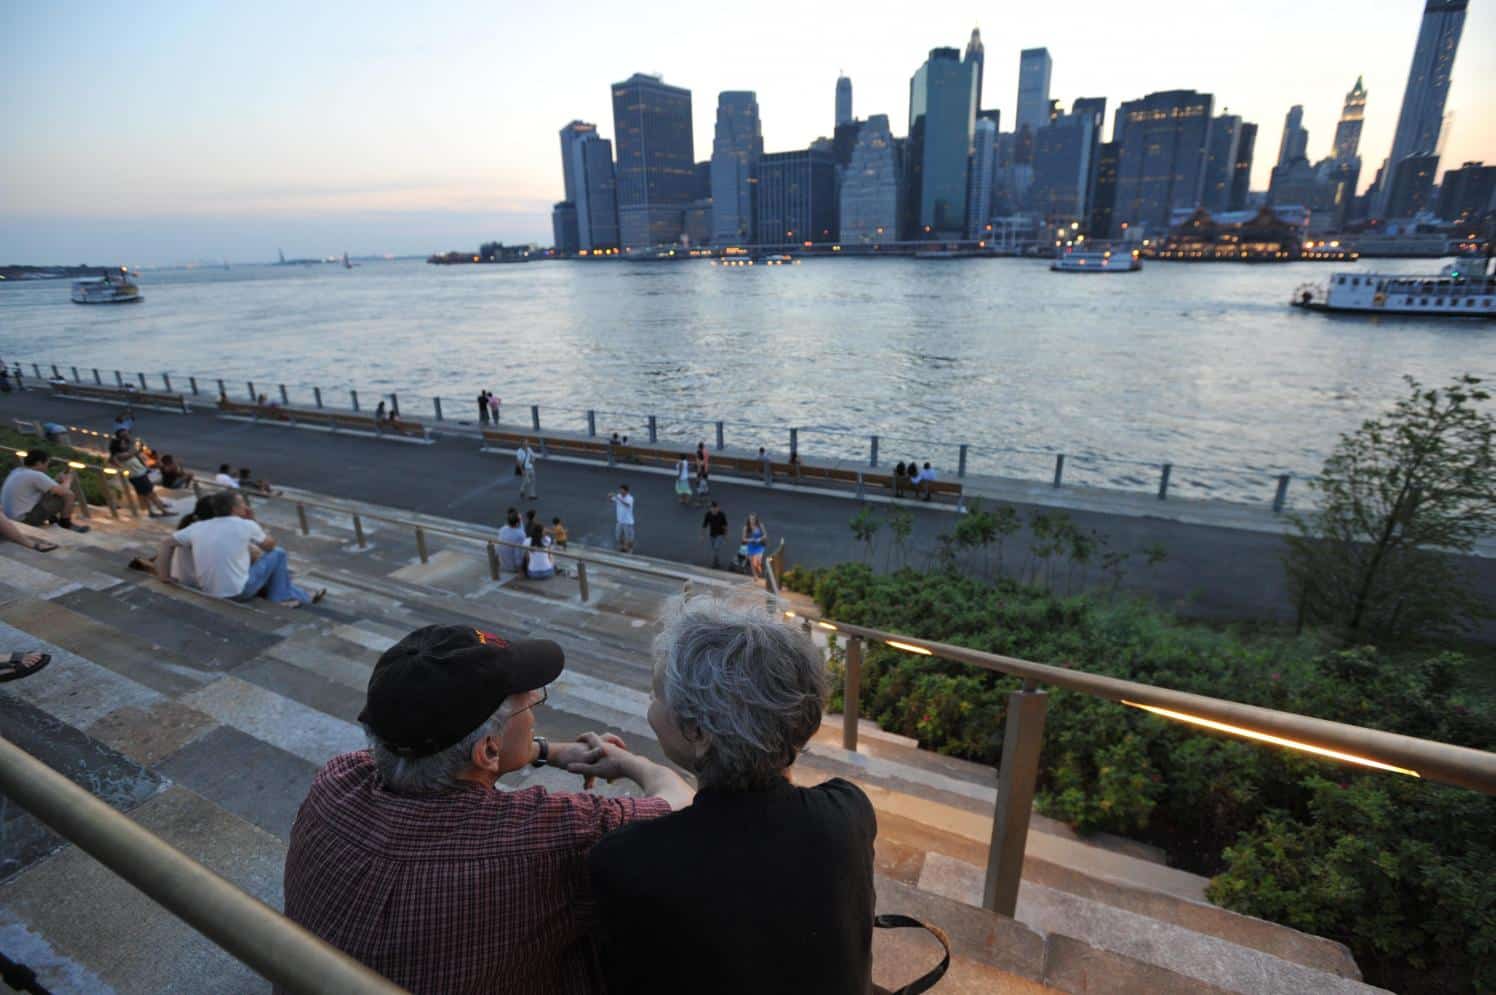 Couple sitting on granite steps overlooking the promenade and East River at sunset.